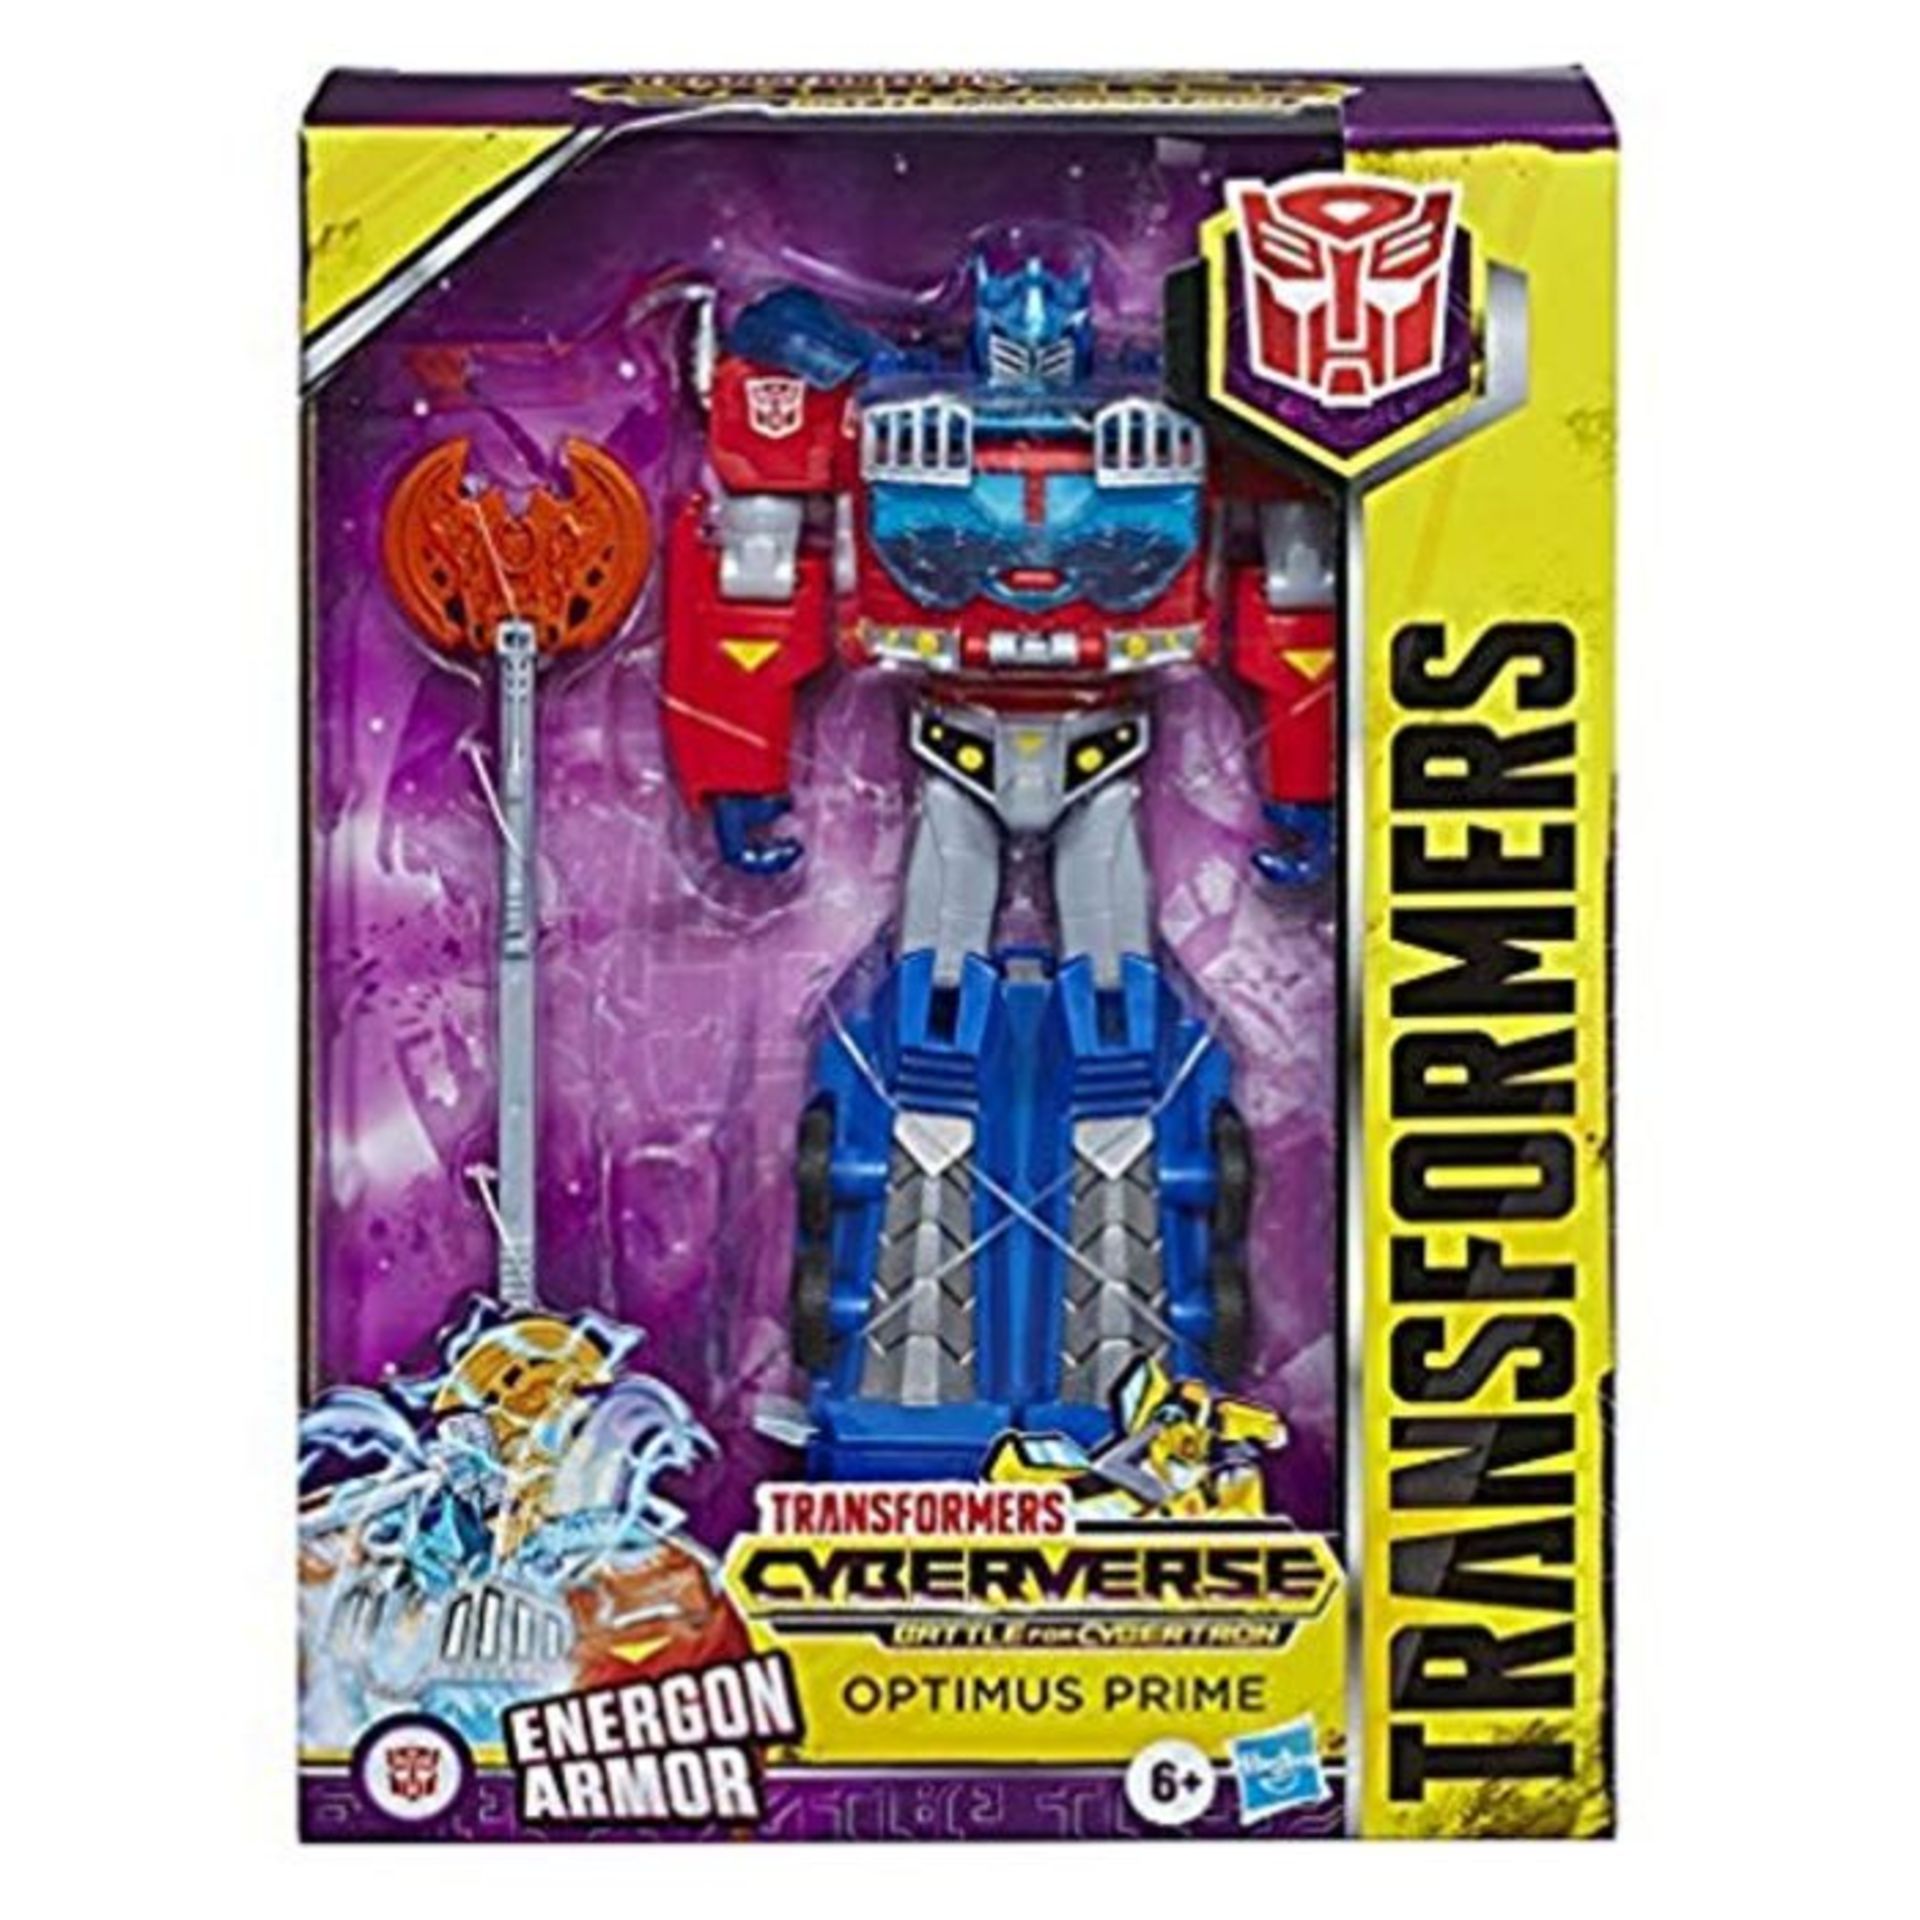 TRANSFORMERS Toys Cyberverse Ultimate Class Optimus Prime Action Figure - Combines wit